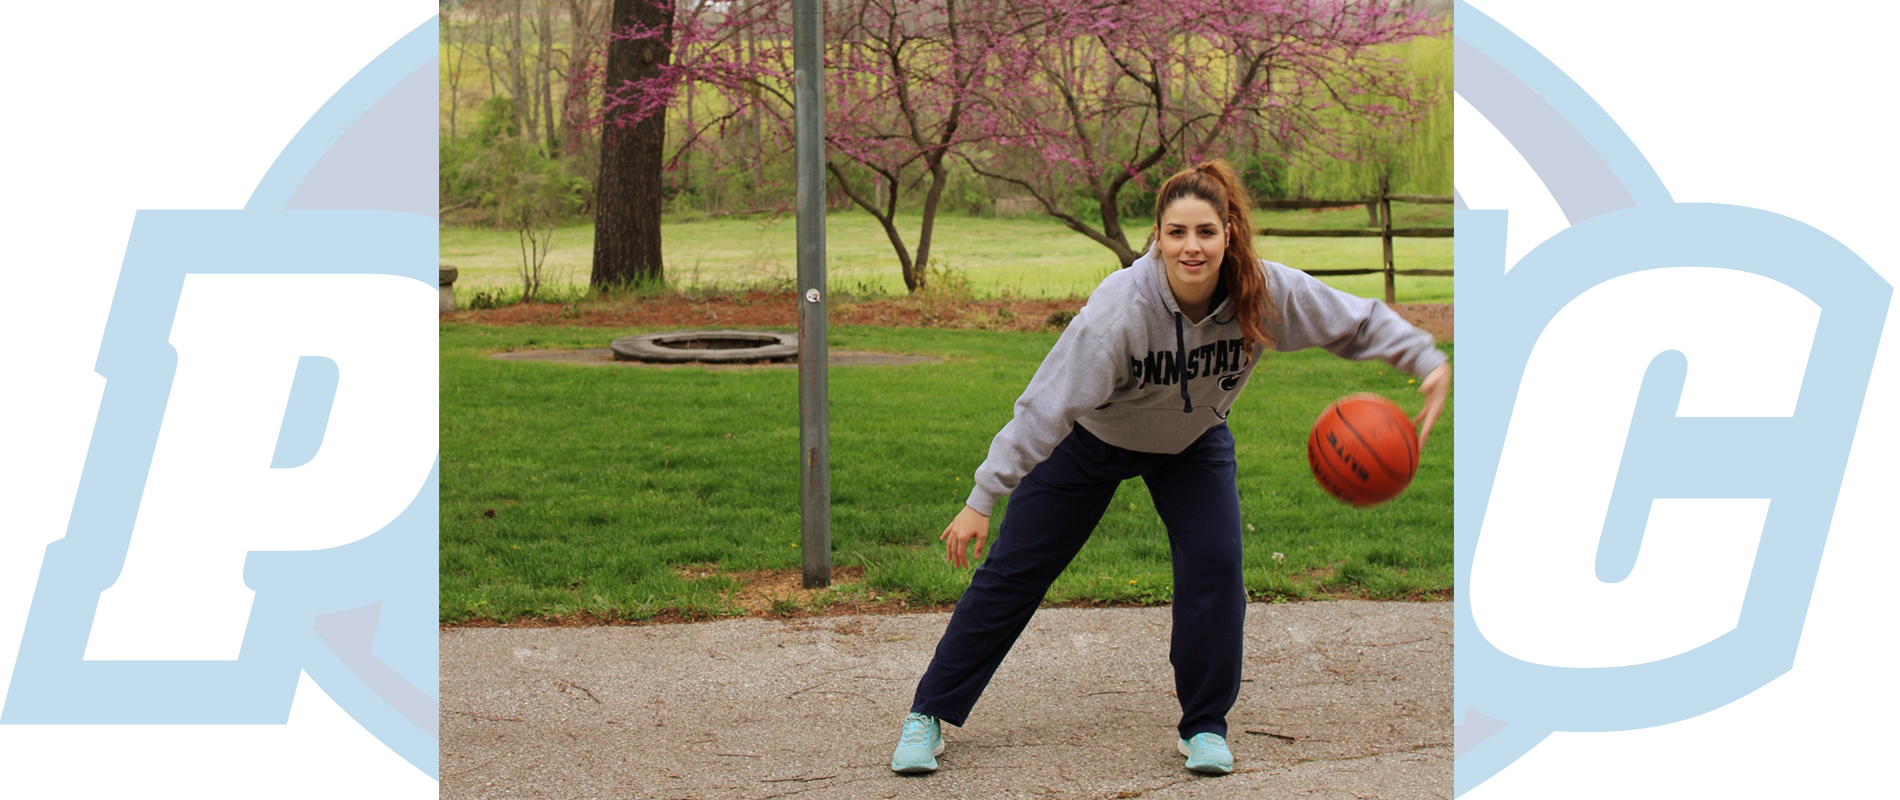 Penn State York's Desiree Garcia-Hernandez raises a family, 
and balances school and sports, all an ocean away from home.